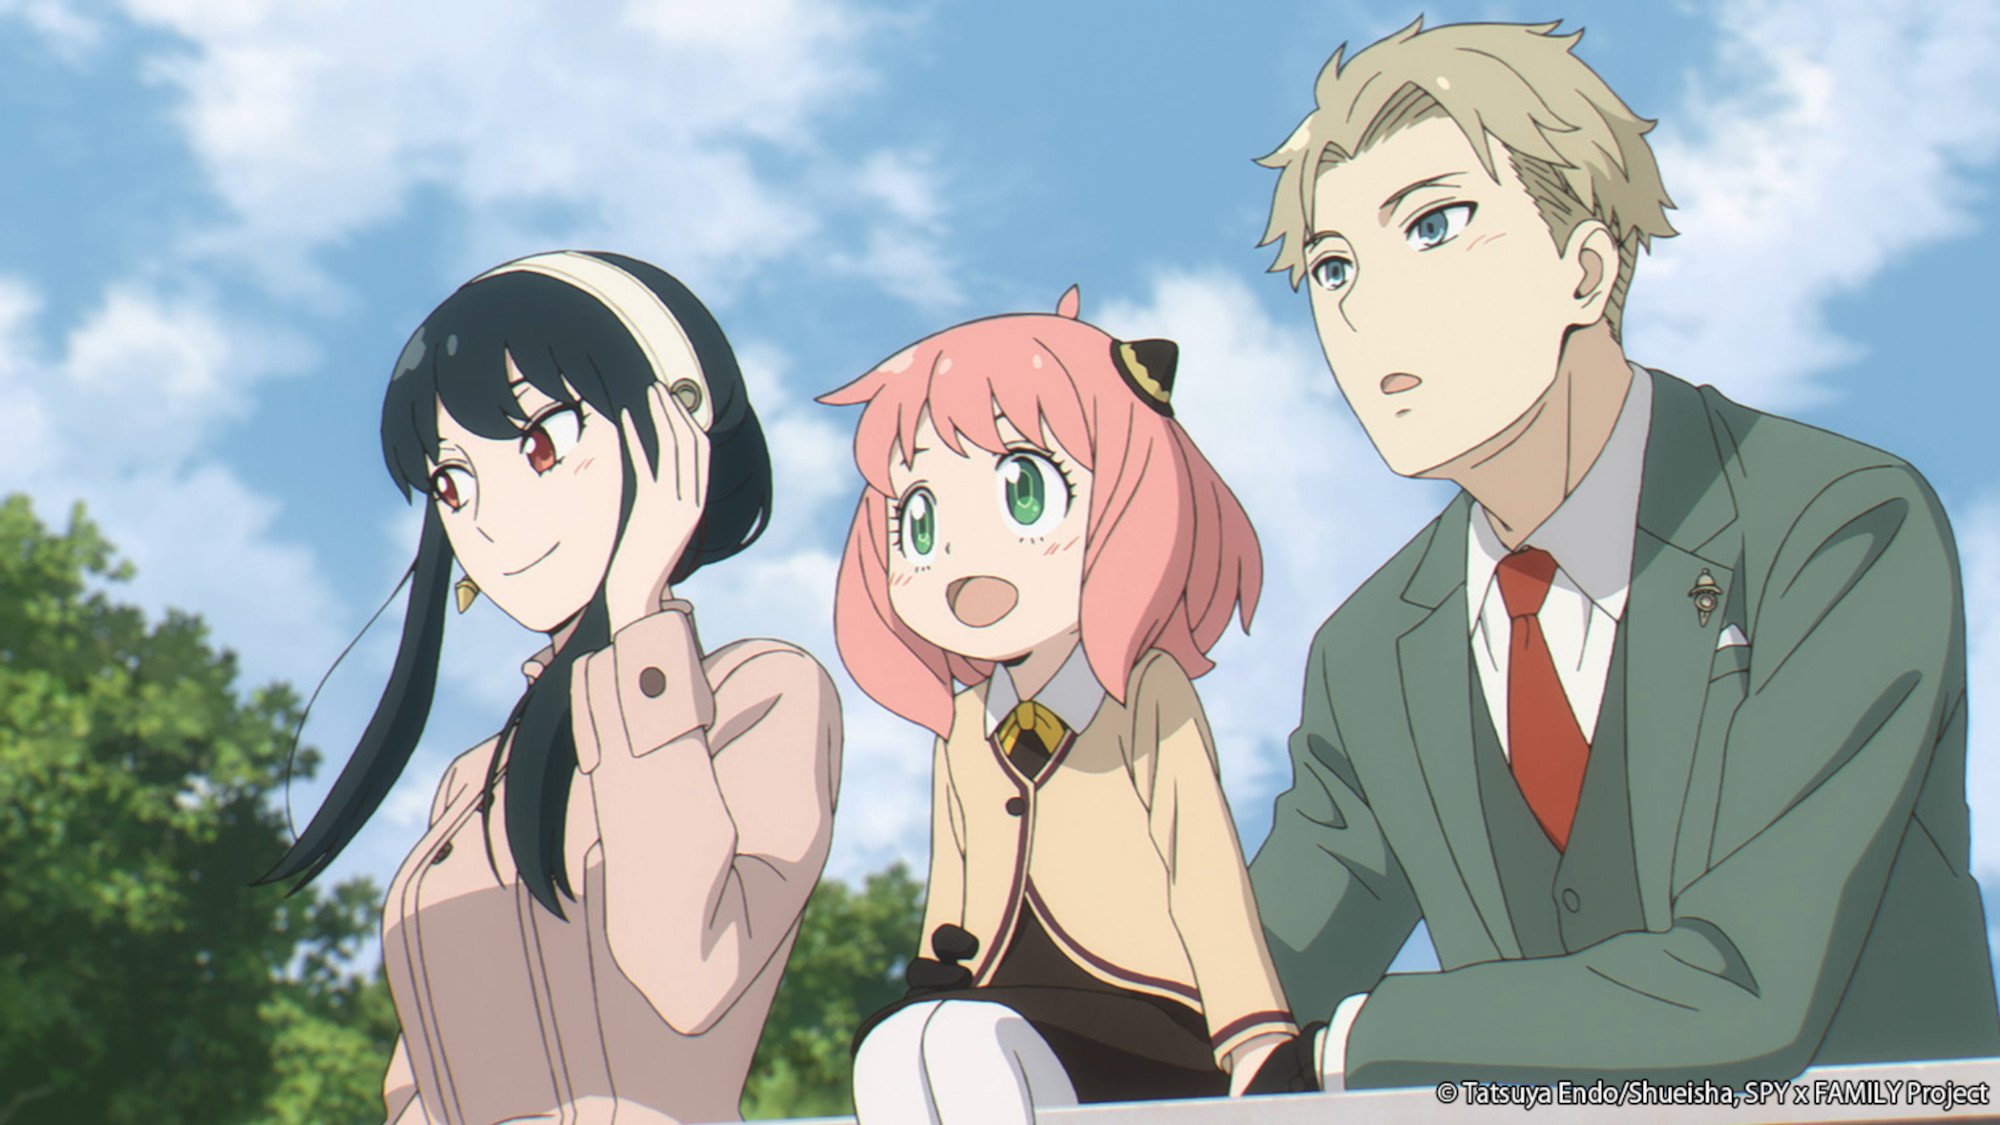 Yor, Anya, and Loid Forger in 'Spy x Family.' They're standing next to one another, wearing nice clothes, and smiling. The sky is blue and cloudy behind them.